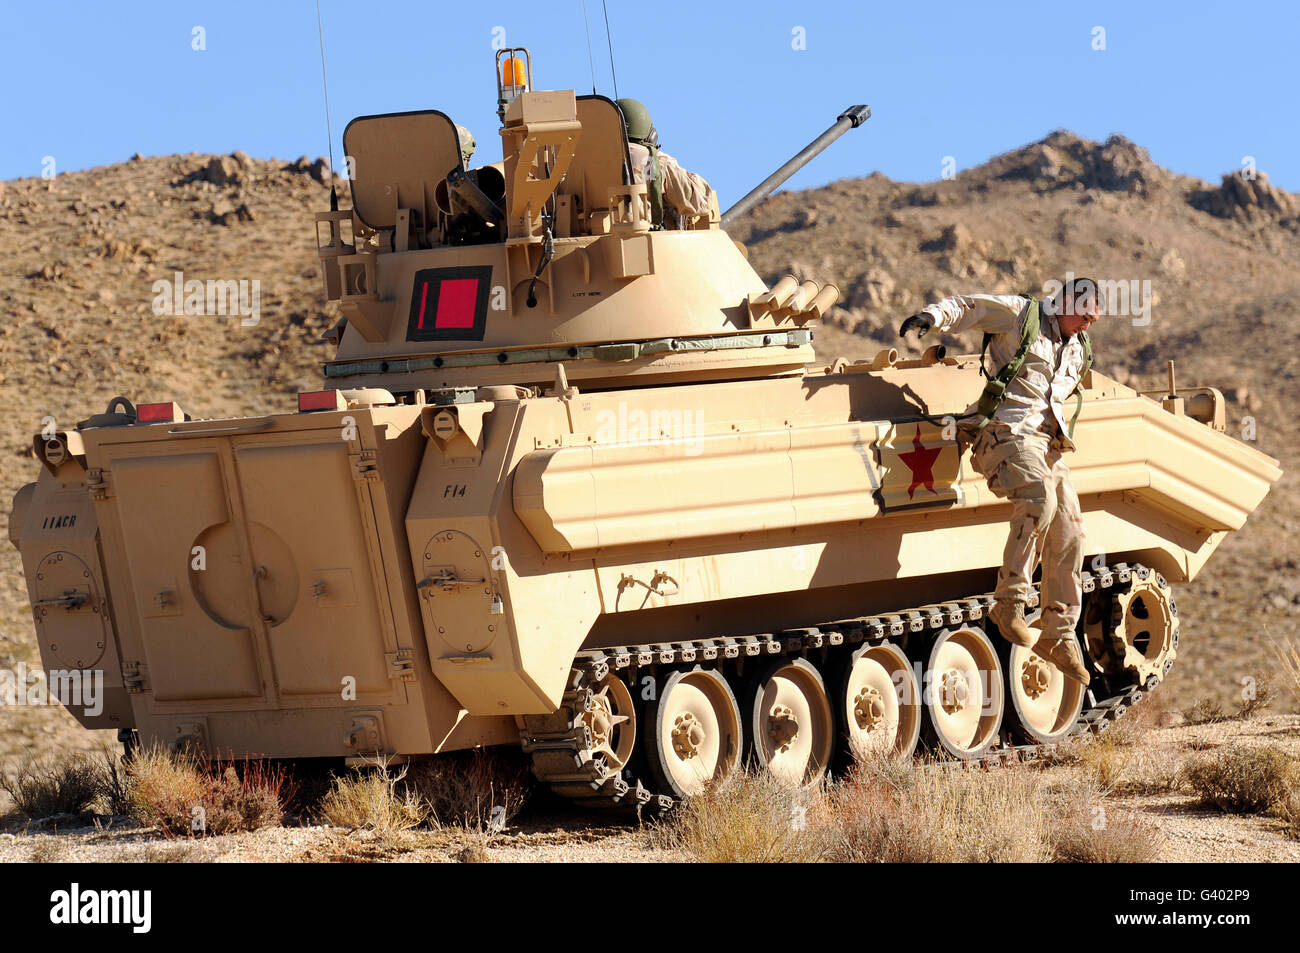 U.S. Army soldier jumps off an M113 armored personnel carrier. Stock Photo